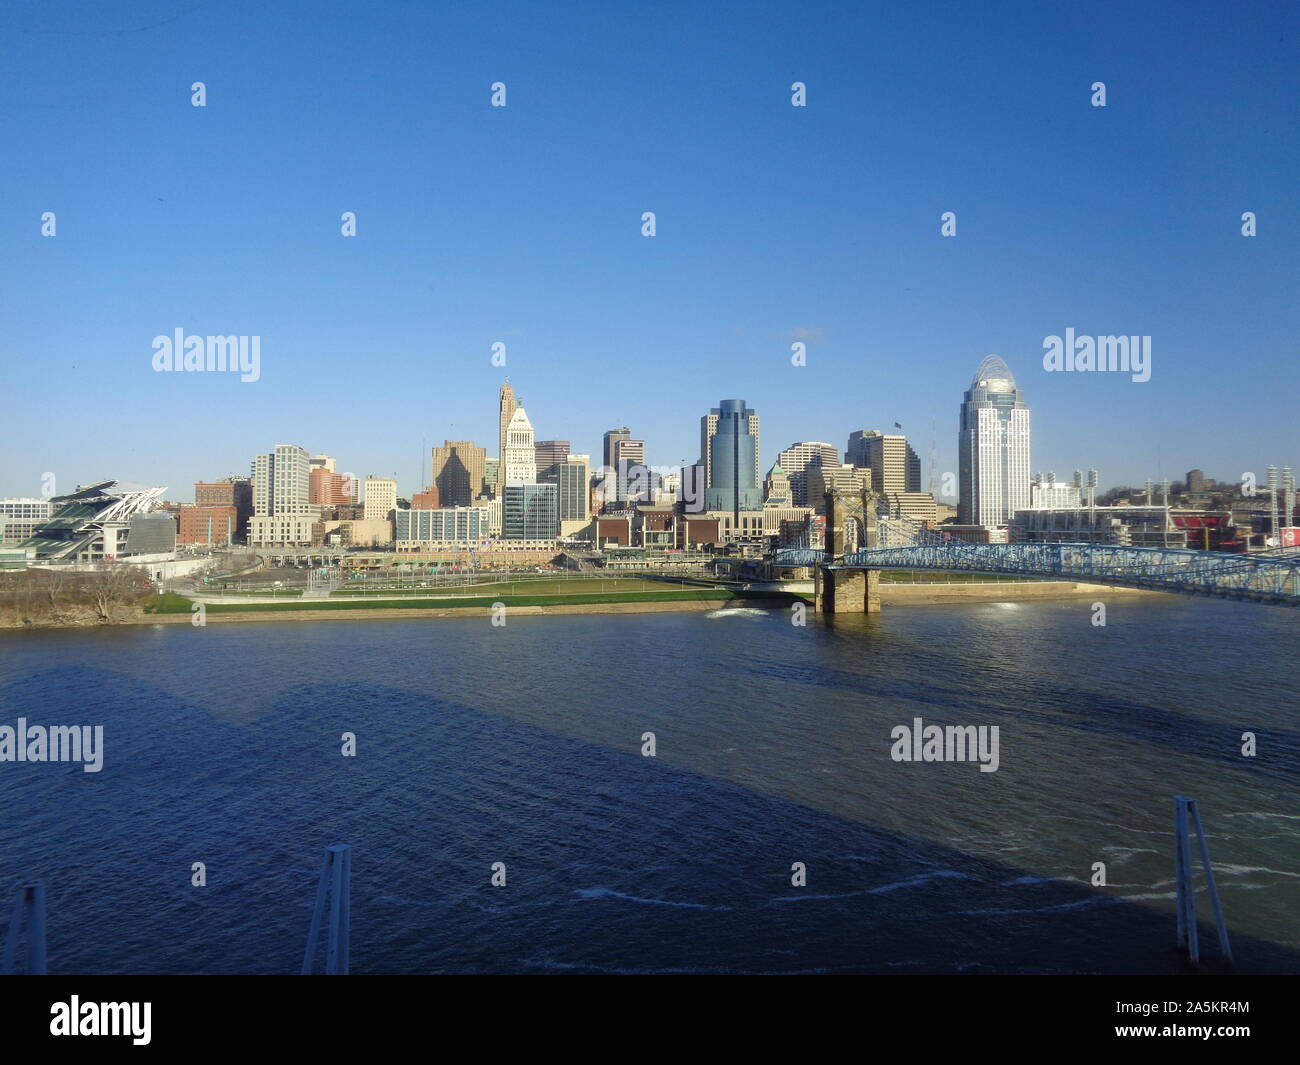 Winter in Kentucky: View of the Ohio River and Cincinnati Riverfront Stock Photo